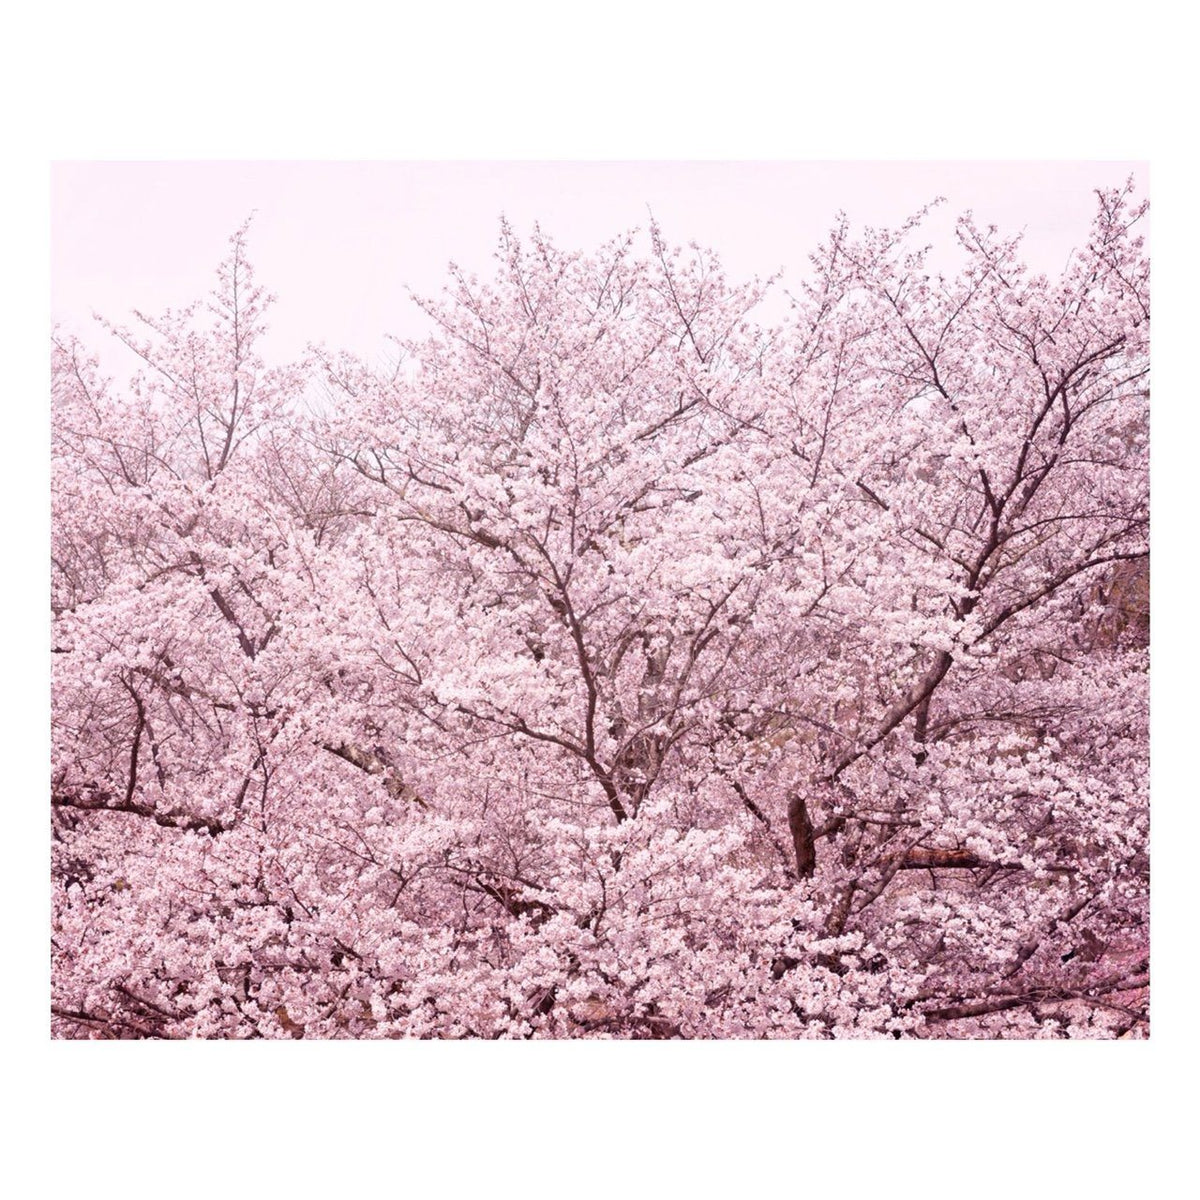 Matted Prints - "Pretty In Pink" | Matted Print